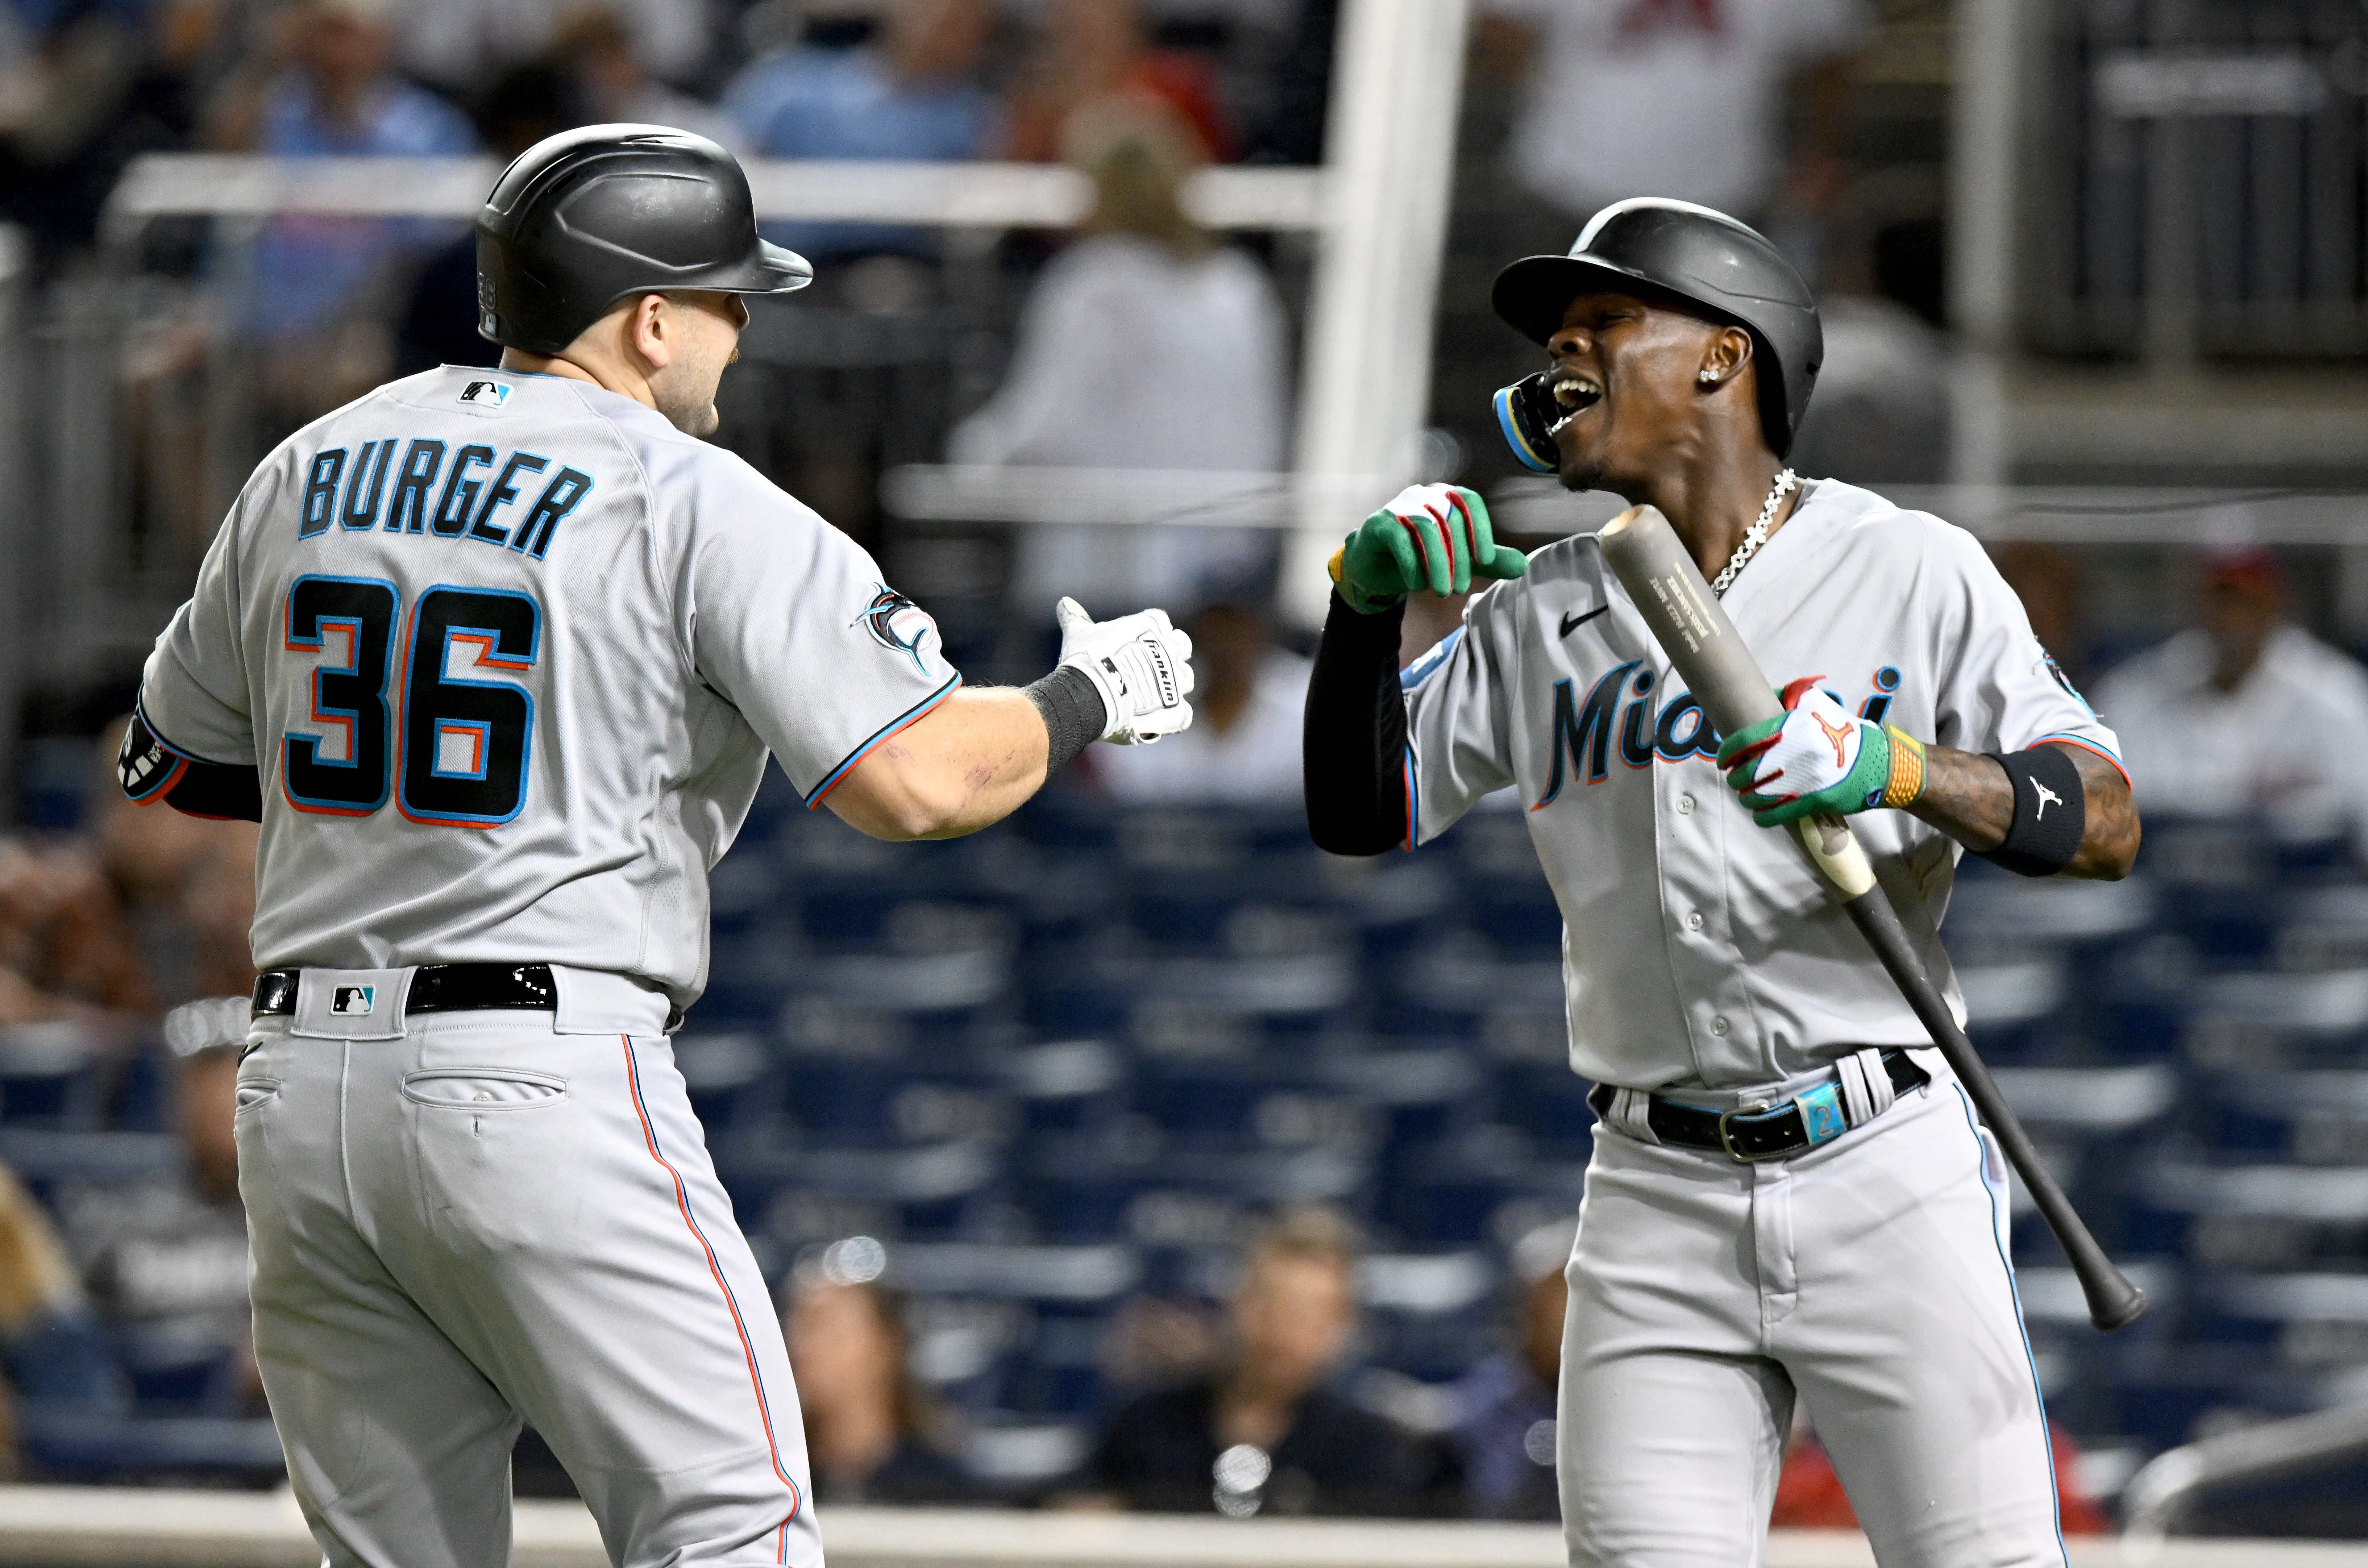 Miami Marlins' Jazz Chisholm Jr. bats during the second inning in